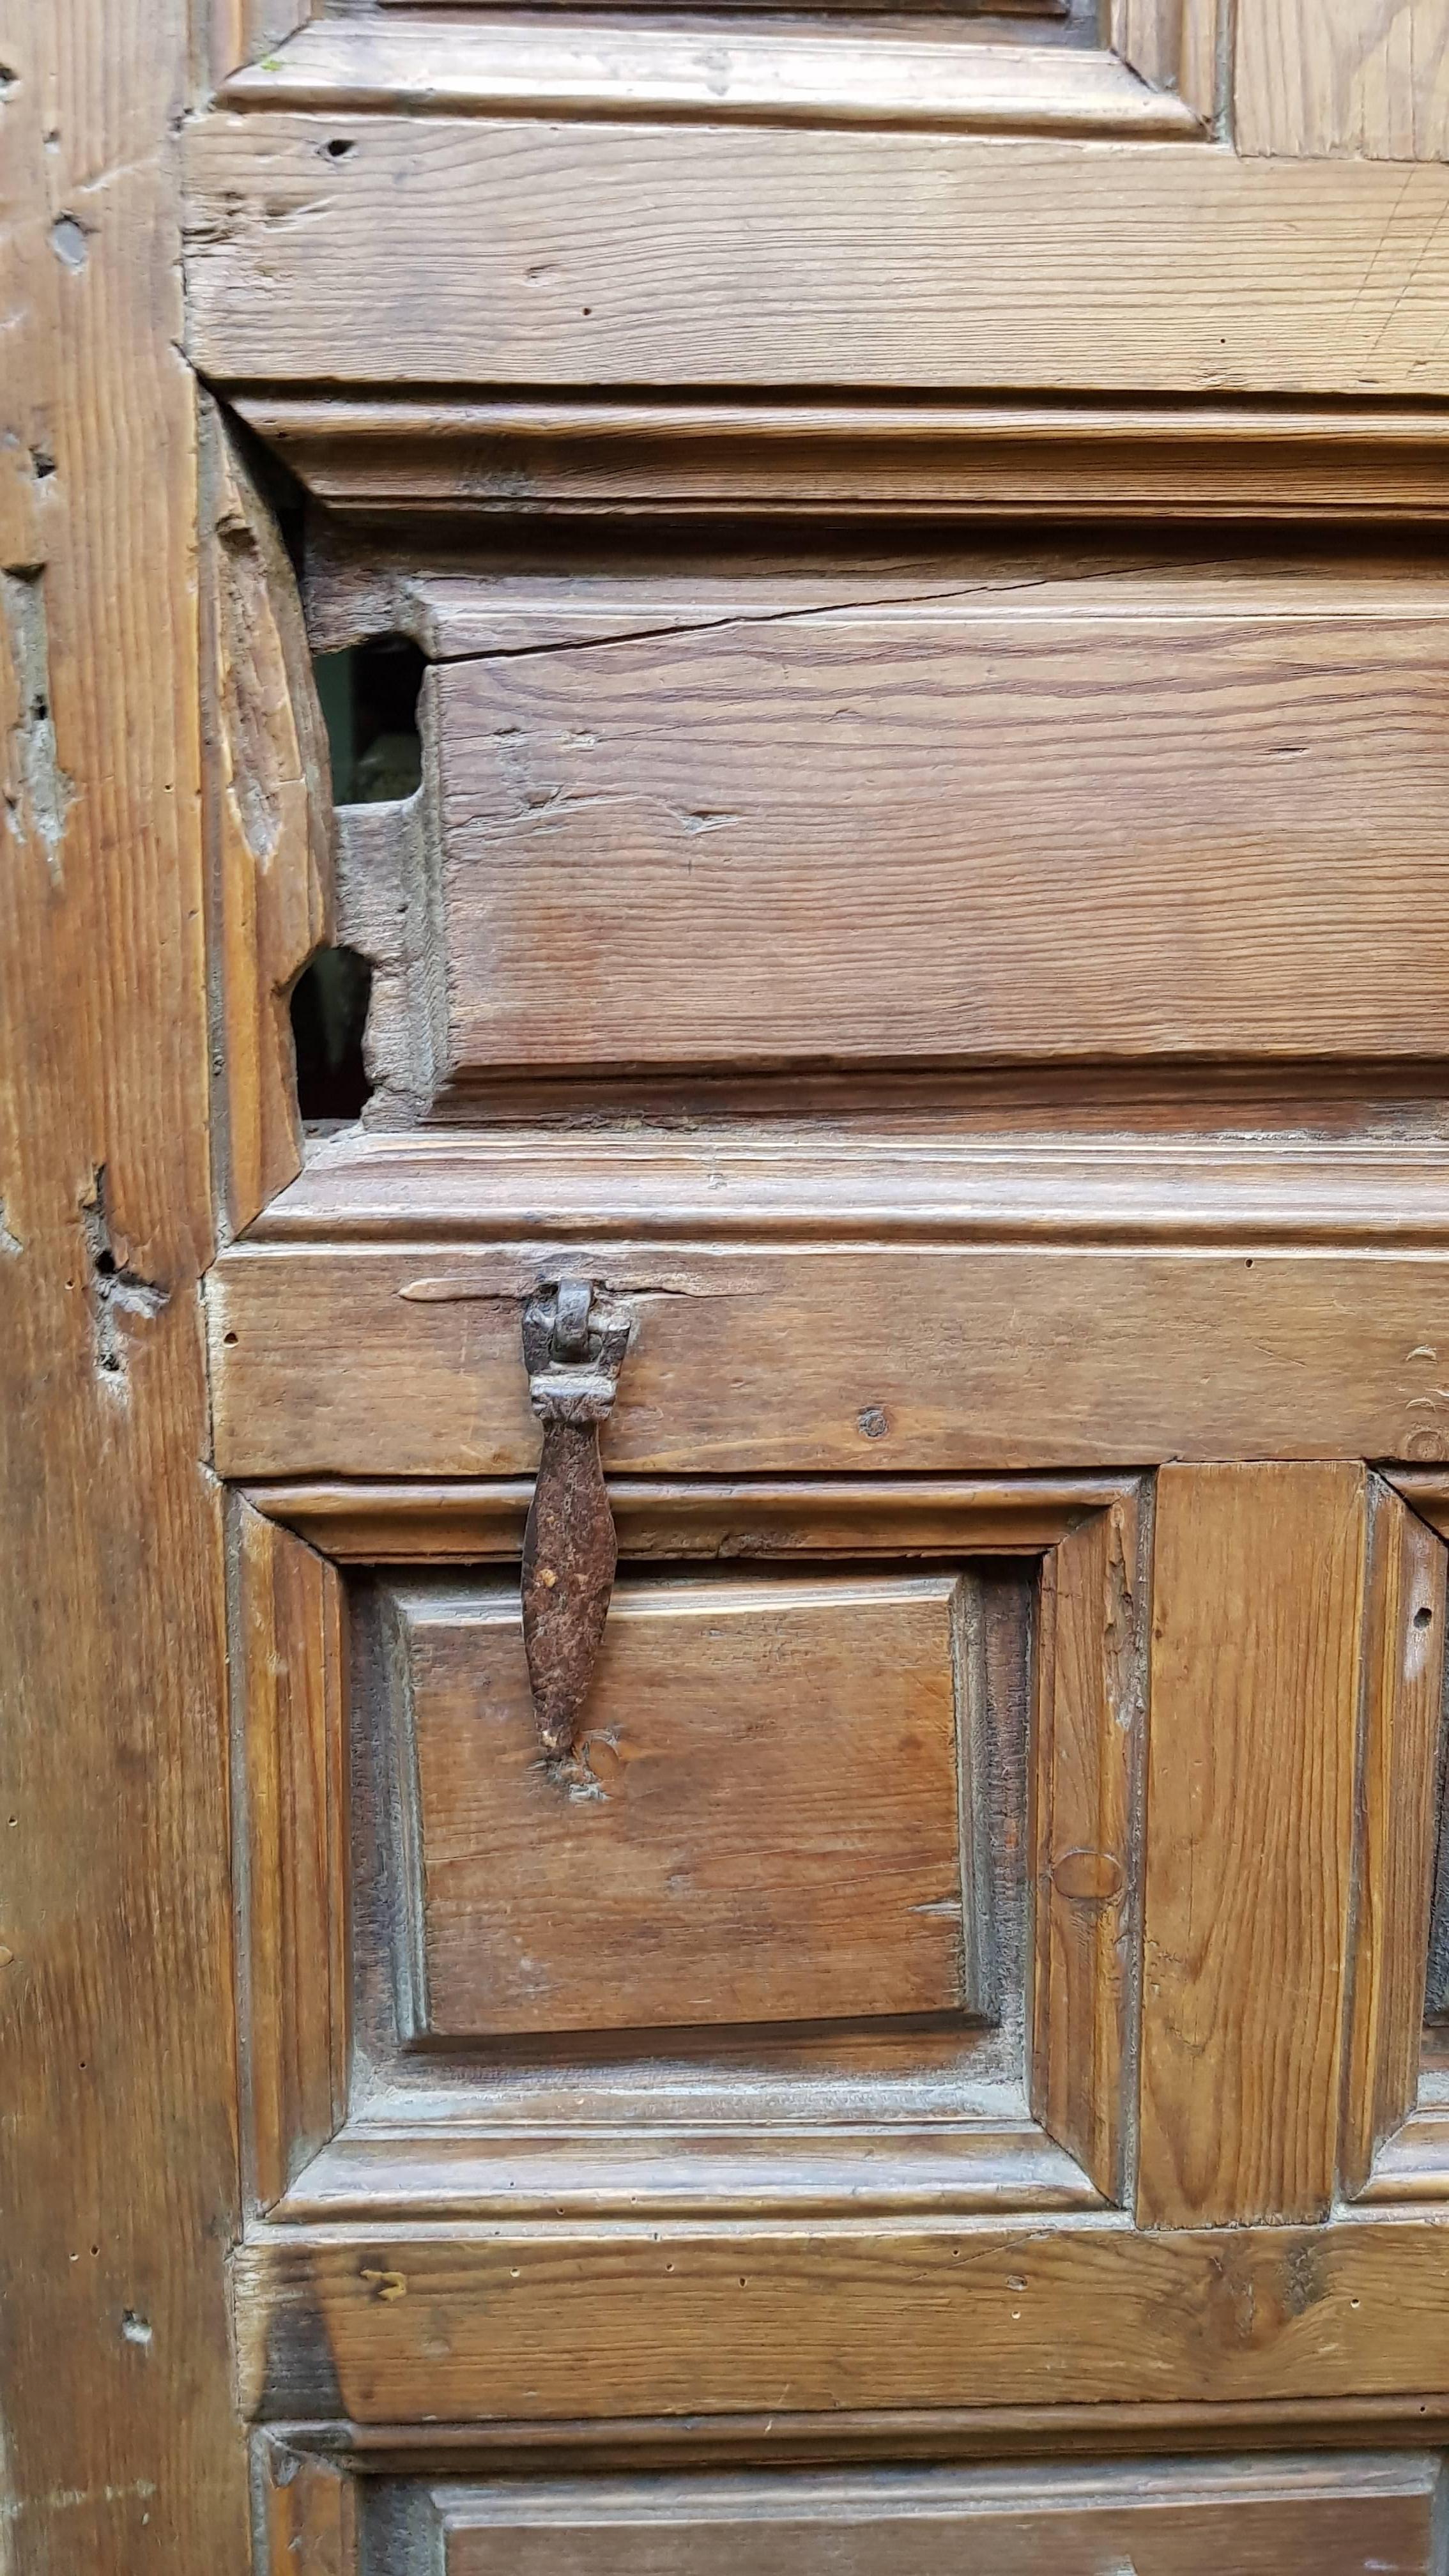 Very nice Spanish front door from the 18th century. The structure and the rectangles on the front part are made in pine wood.